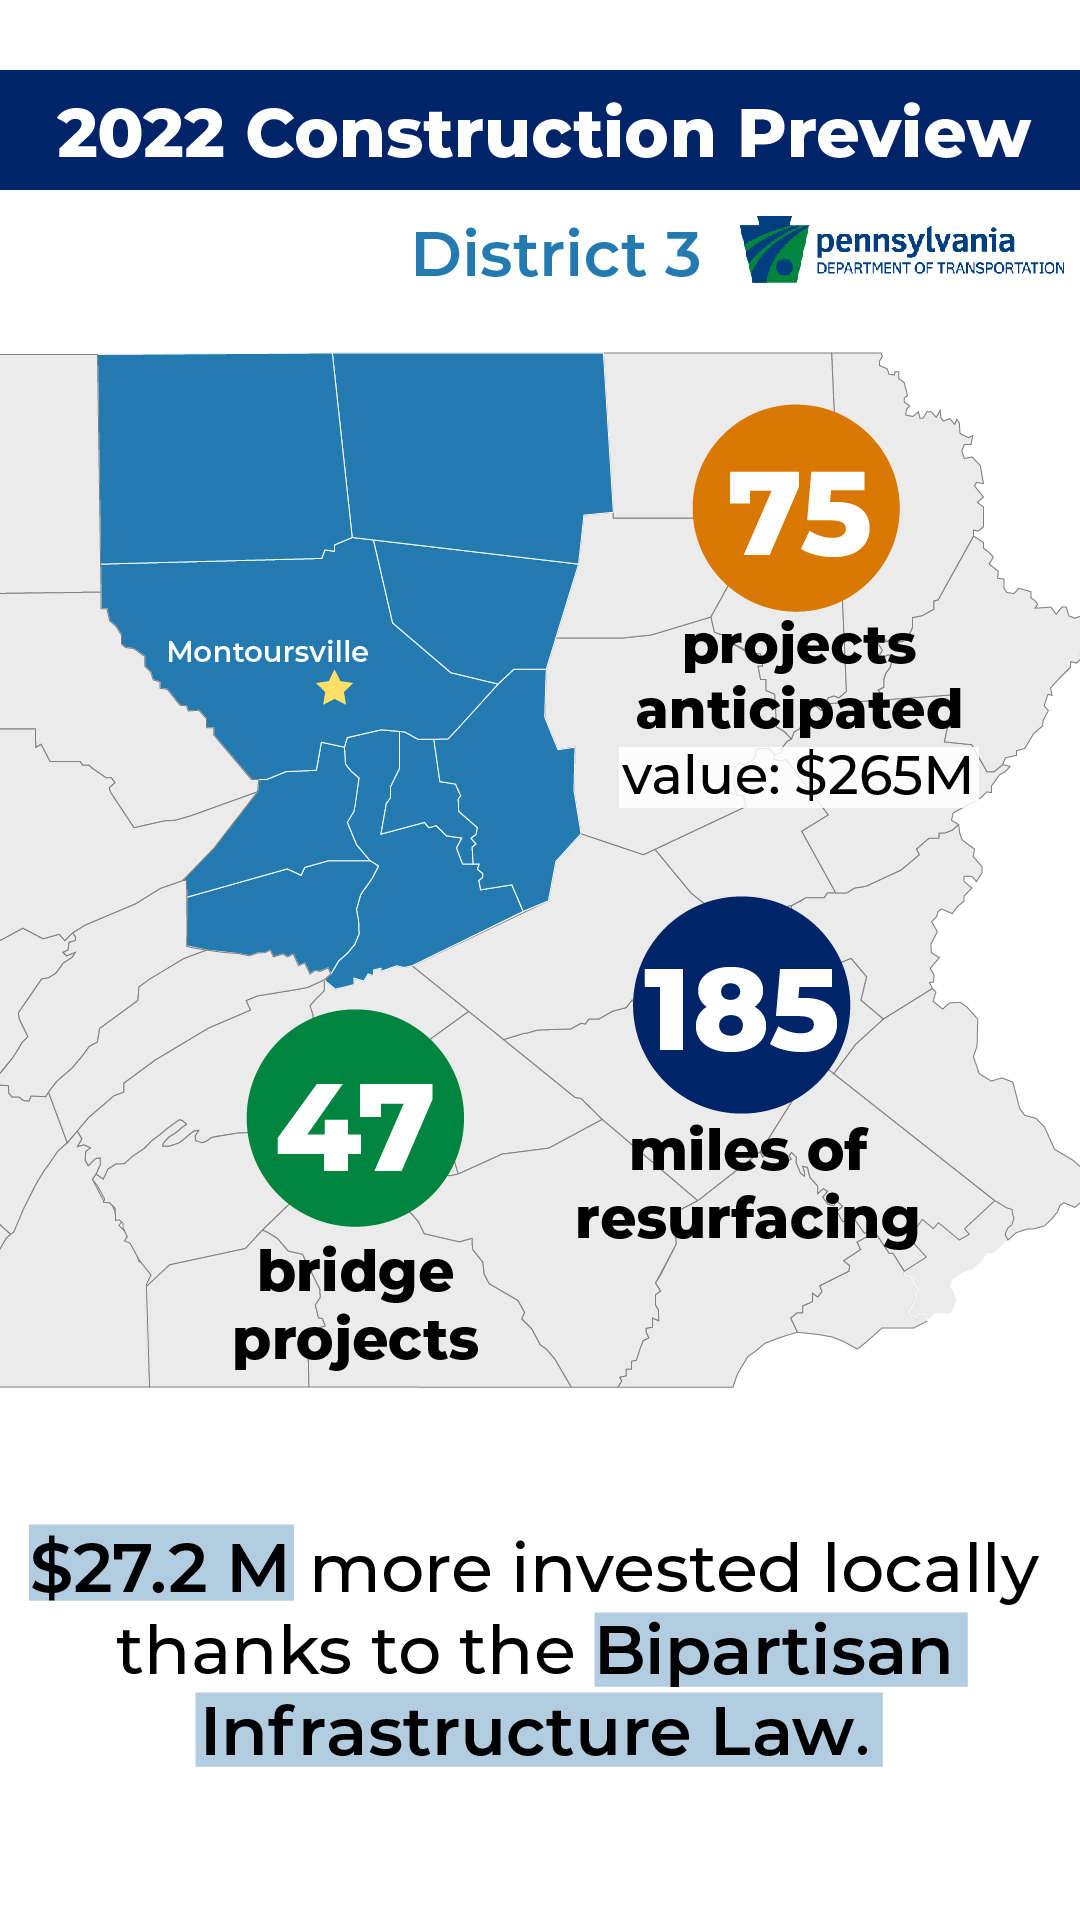 In PennDOT's District 3, 75 projects are anticipated for 2022 with a value of $265 million, as well as 185 miles of resurfacing and 47 bridge projects. Thanks to the Bipartisan Infrastructure Law, $27.2 million more will be invested locally.